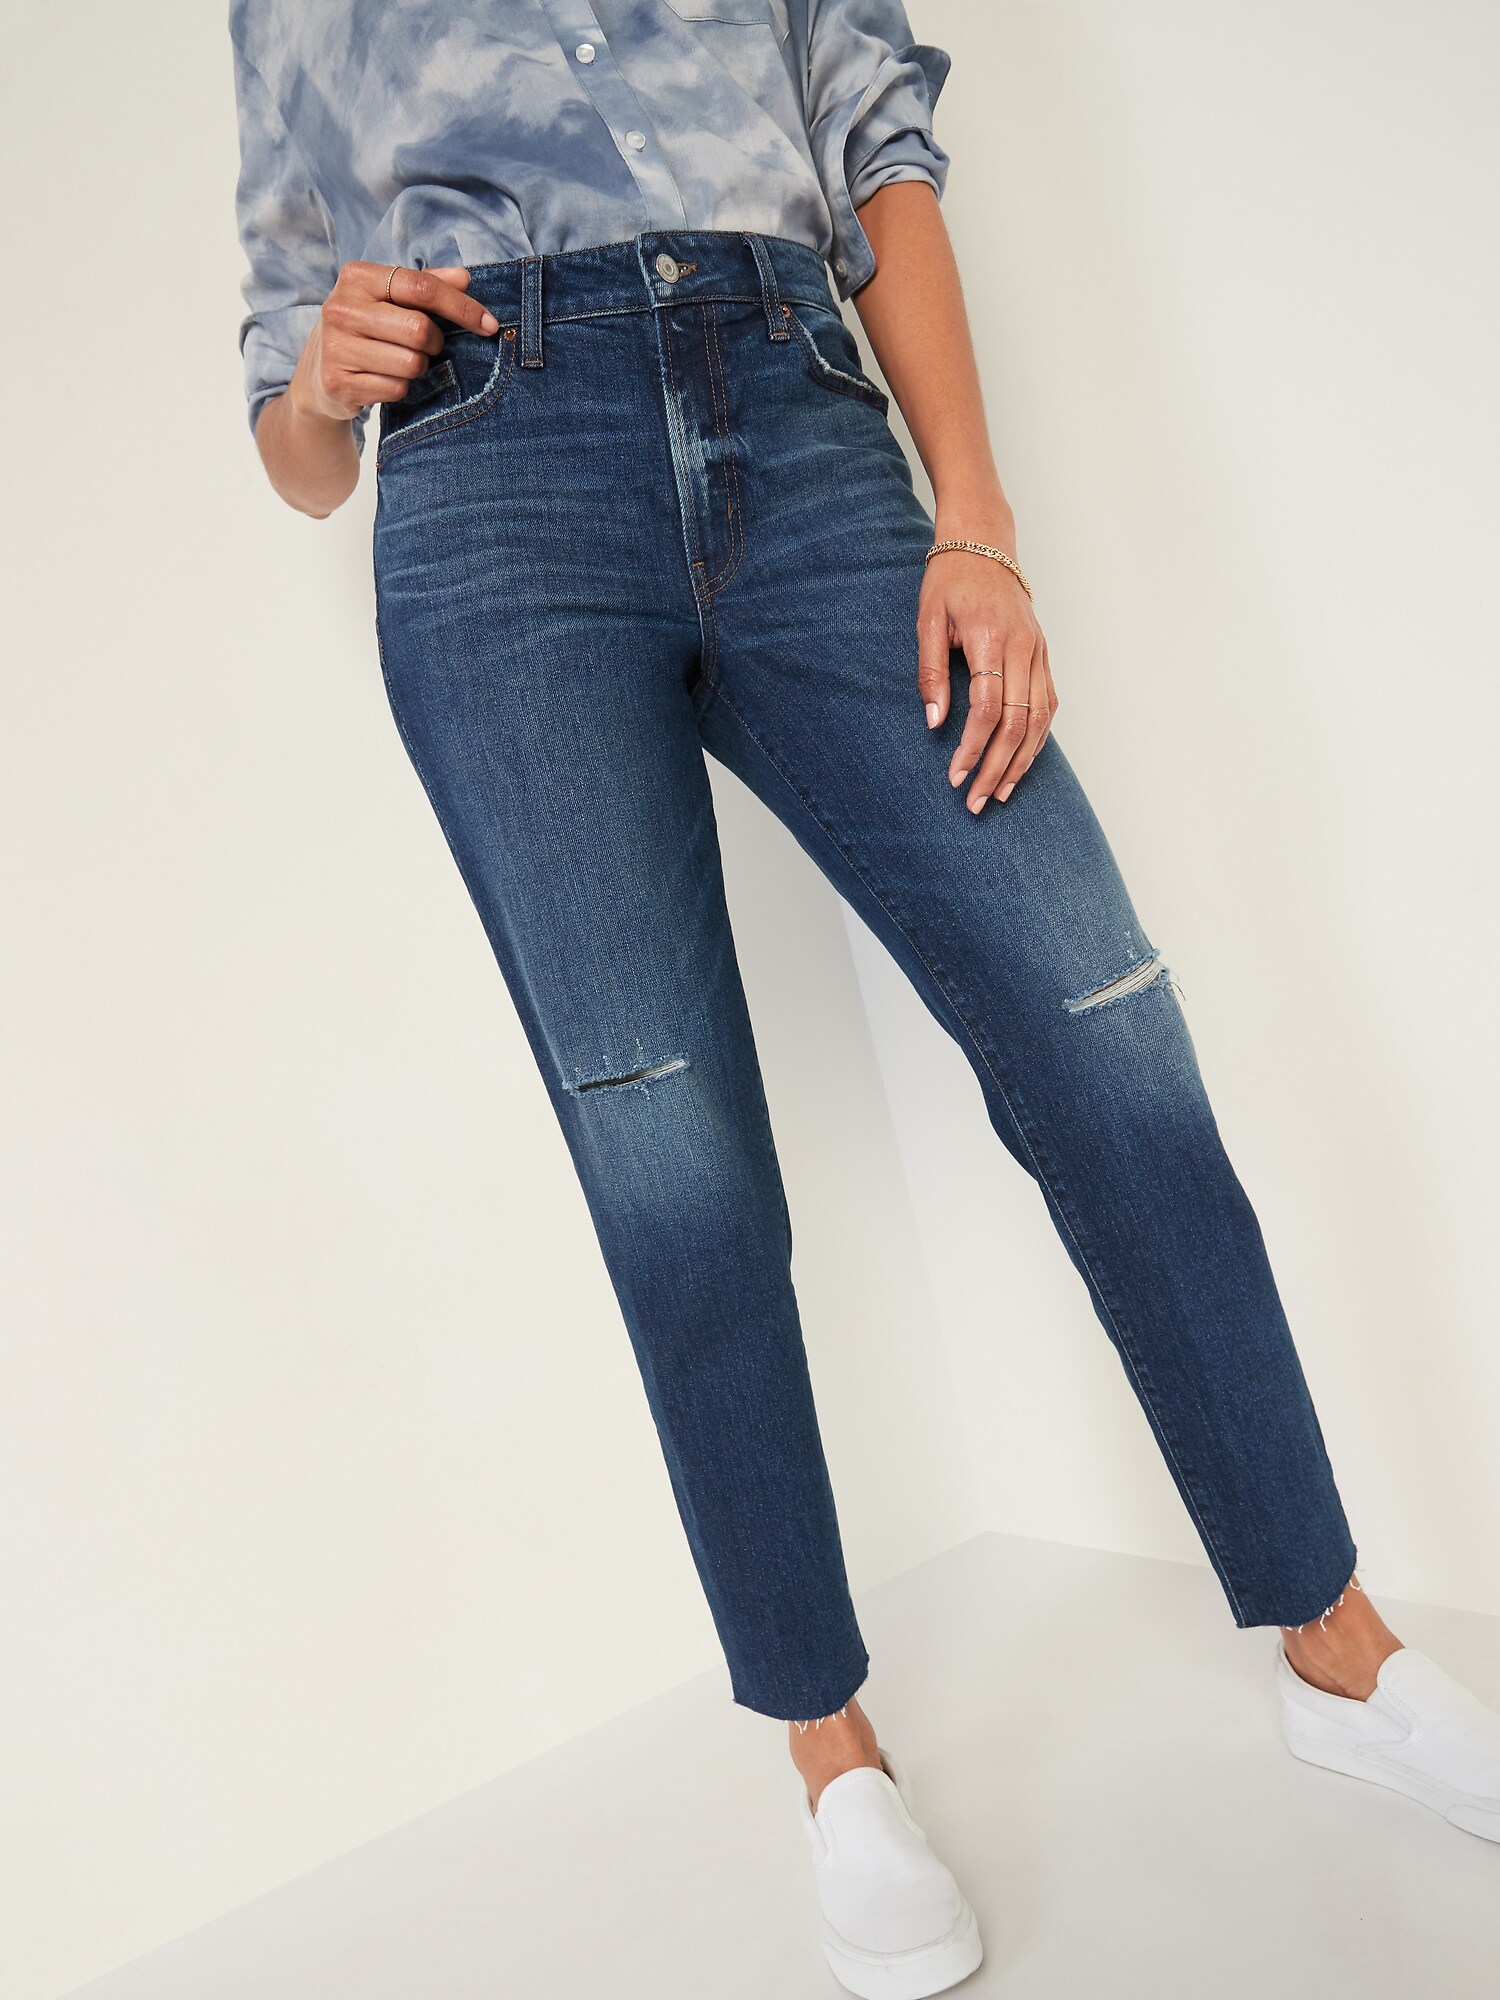 High-Waisted OG Loose Black Ripped Cut-Off Jeans for Women